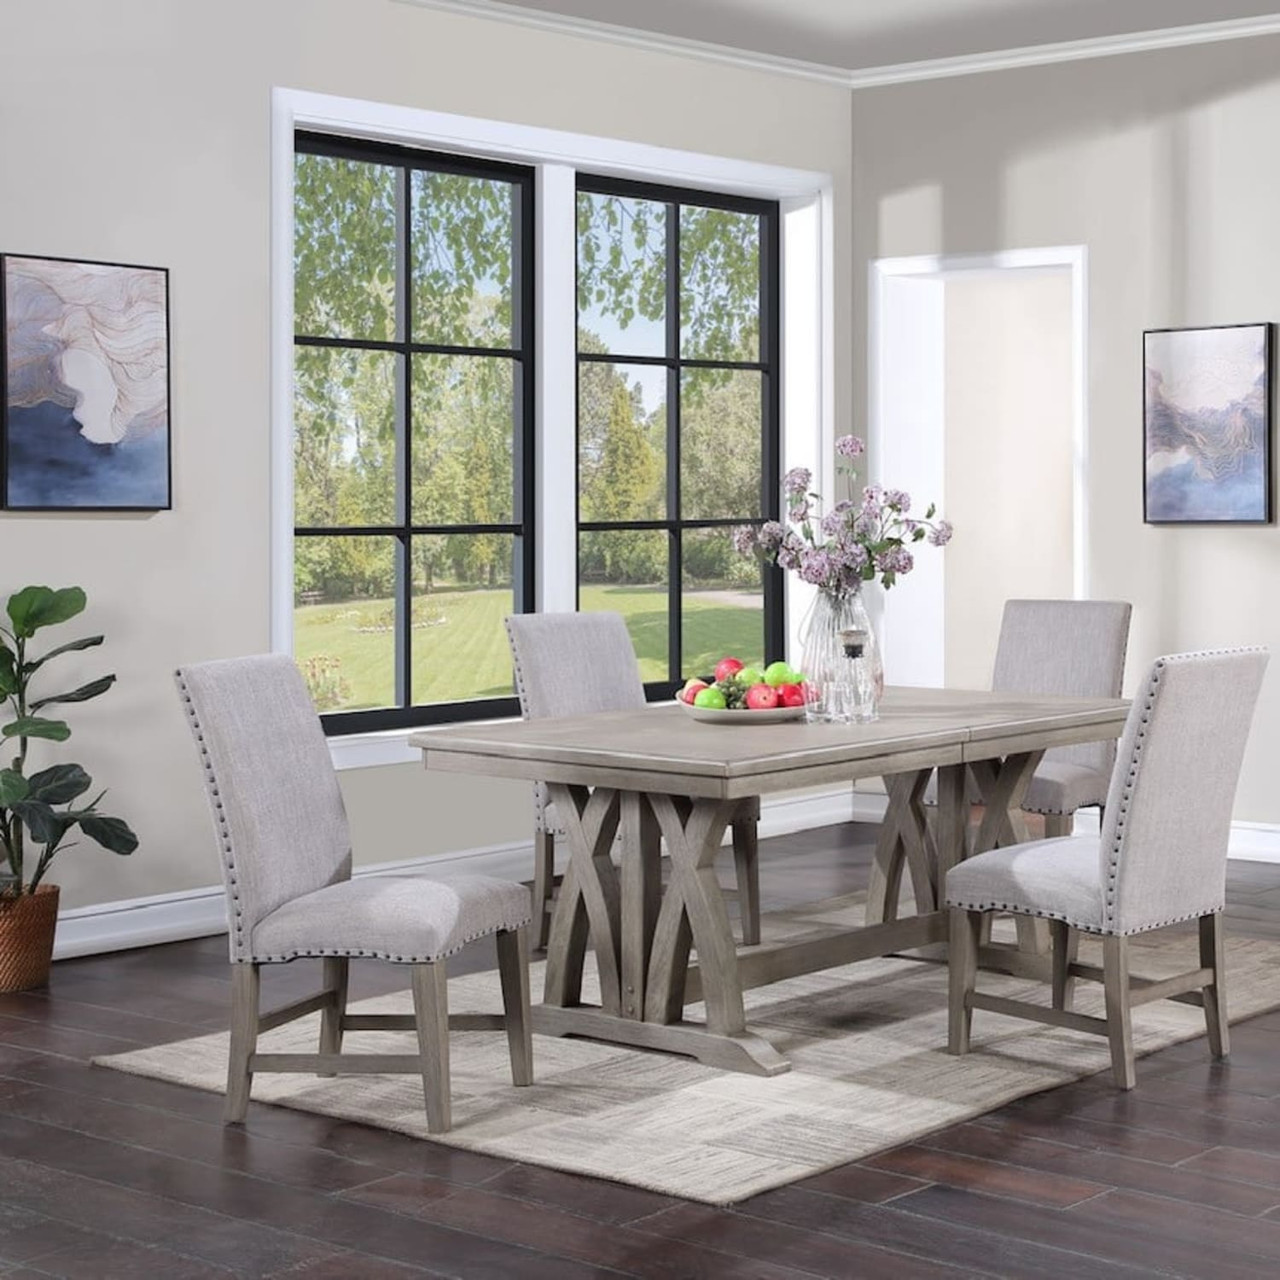 DEVON GREY 5PC DINING SET - TABLE & 4 CHAIRS